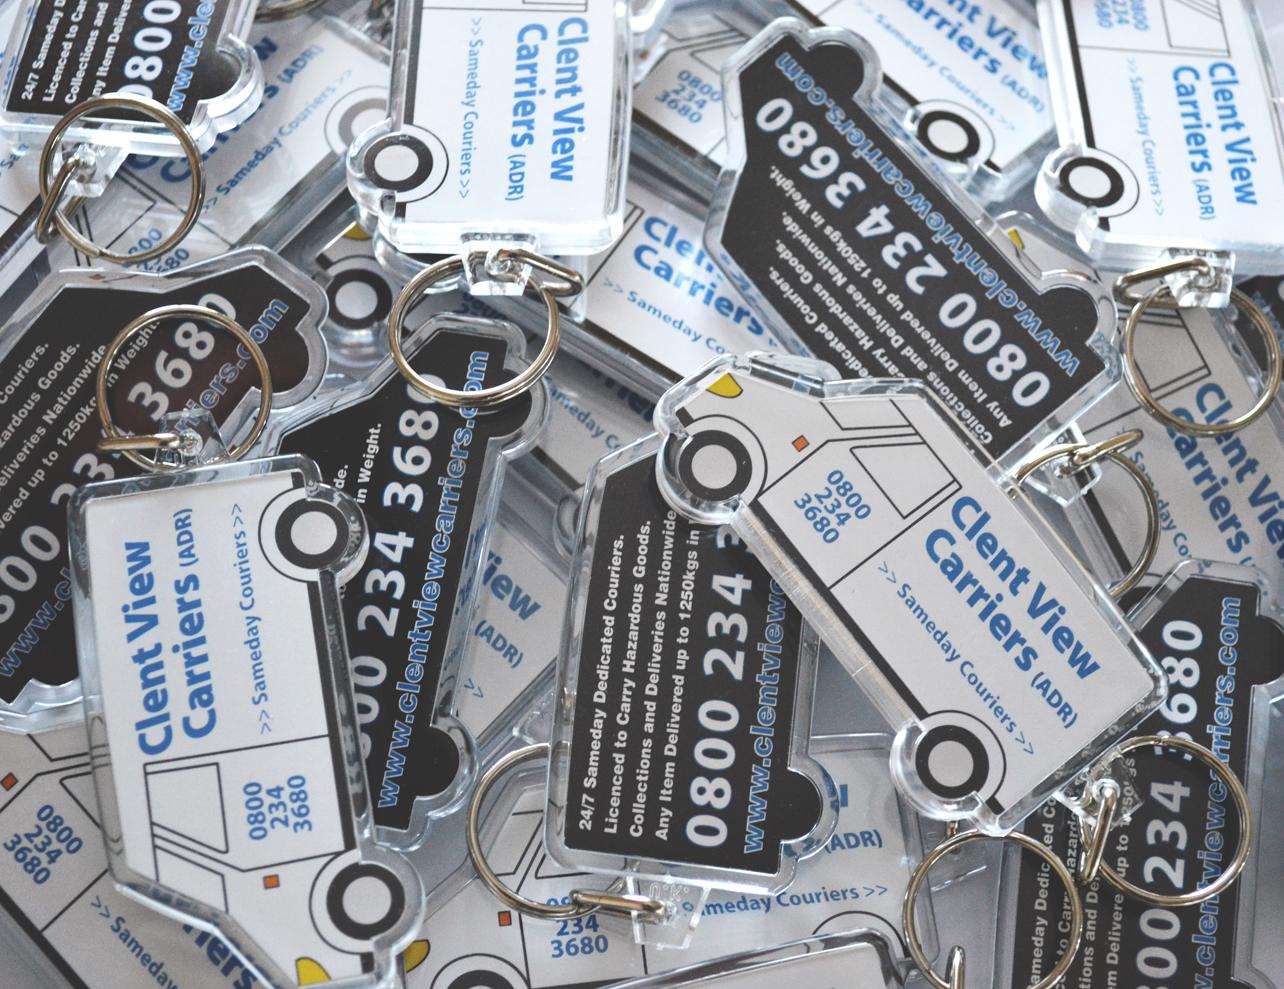 Promotional product giveaways, keyrings, magnets